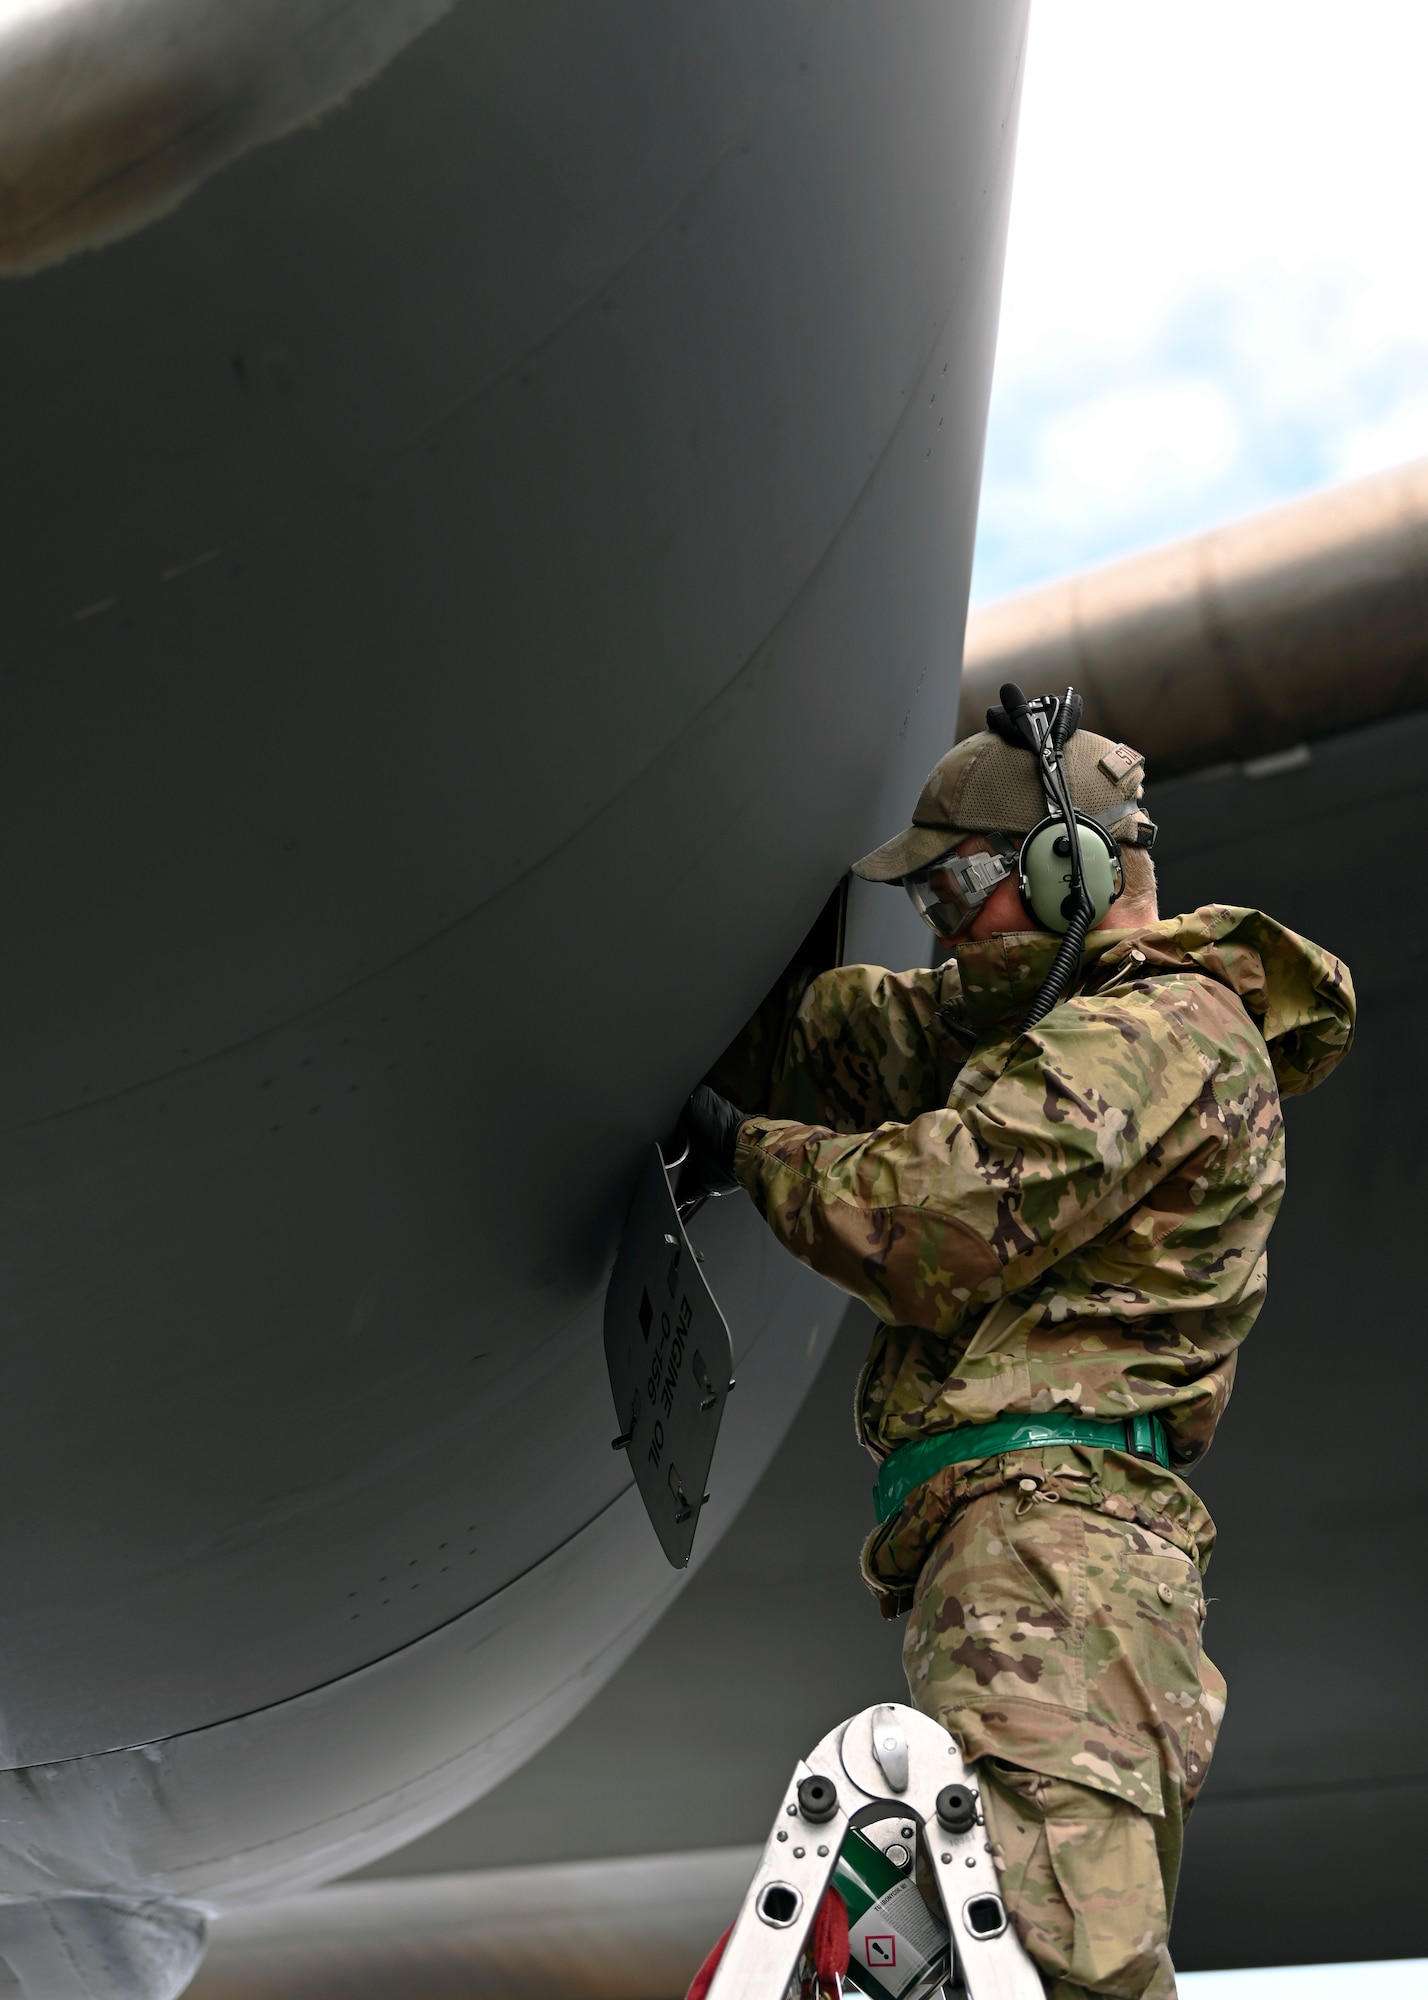 U.S. Air Force Airman 1st Class David Stanger, a crew chief with the 62d Aircraft Maintenance Squadron, services the engine oil on a C-17 Globemaster III participating in Exercise Rainier War 23A at Joint Base Lewis-McChord, Washington, Sept. 26, 2023. Rainier War is an annual exercise led by the 62d Airlift Wing designed to evaluate the ability to generate, employ and sustain in-garrison and forward deployed forces. These exercises are necessary in assessing and maintaining wartime operation tempos, ensuring command and control across multiple locations. During the exercise, Airmen will respond to scenarios that replicate today’s contingency operations and will address full-spectrum readiness against modern threats brought on by peer adversaries. (U.S. Air Force photo by Senior Airman Callie Norton)